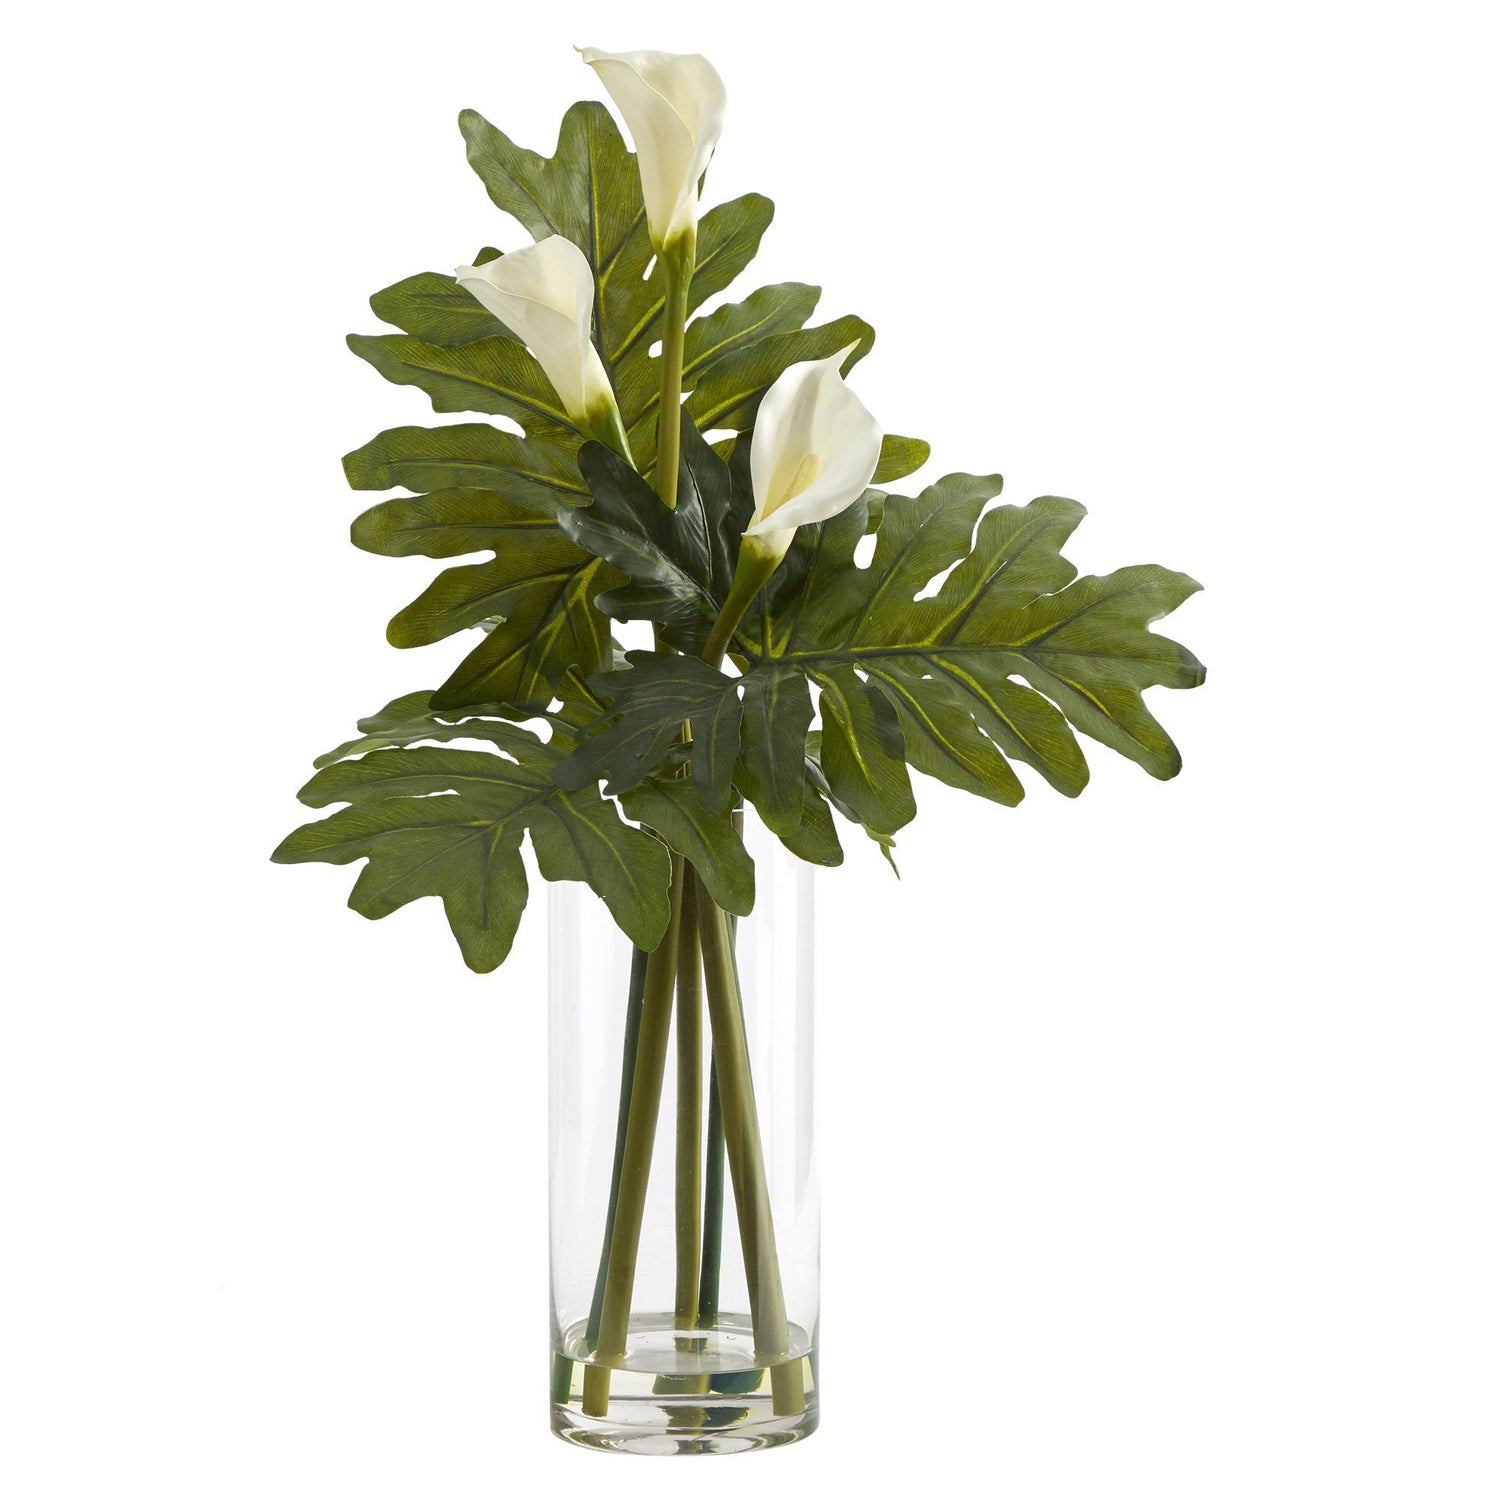 29” Calla Lily and Philo Artificial Arrangement in Glass Vase